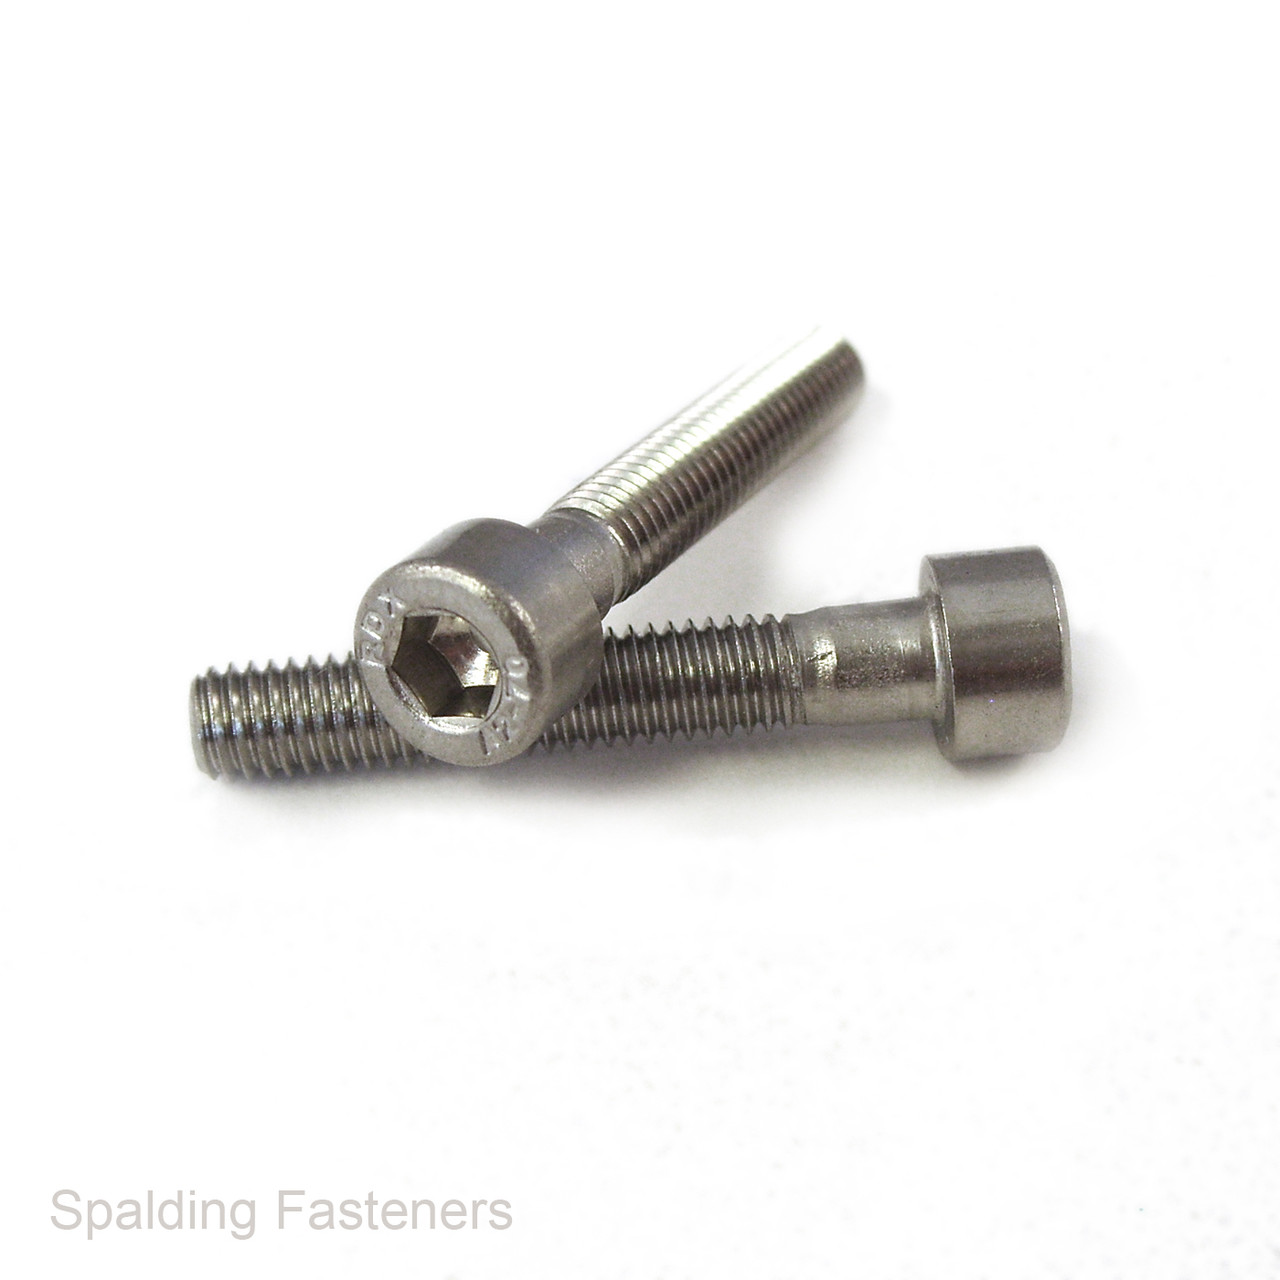 M8 Metric A2 Grade Stainless Steel Socket Cap Bolts With Shank